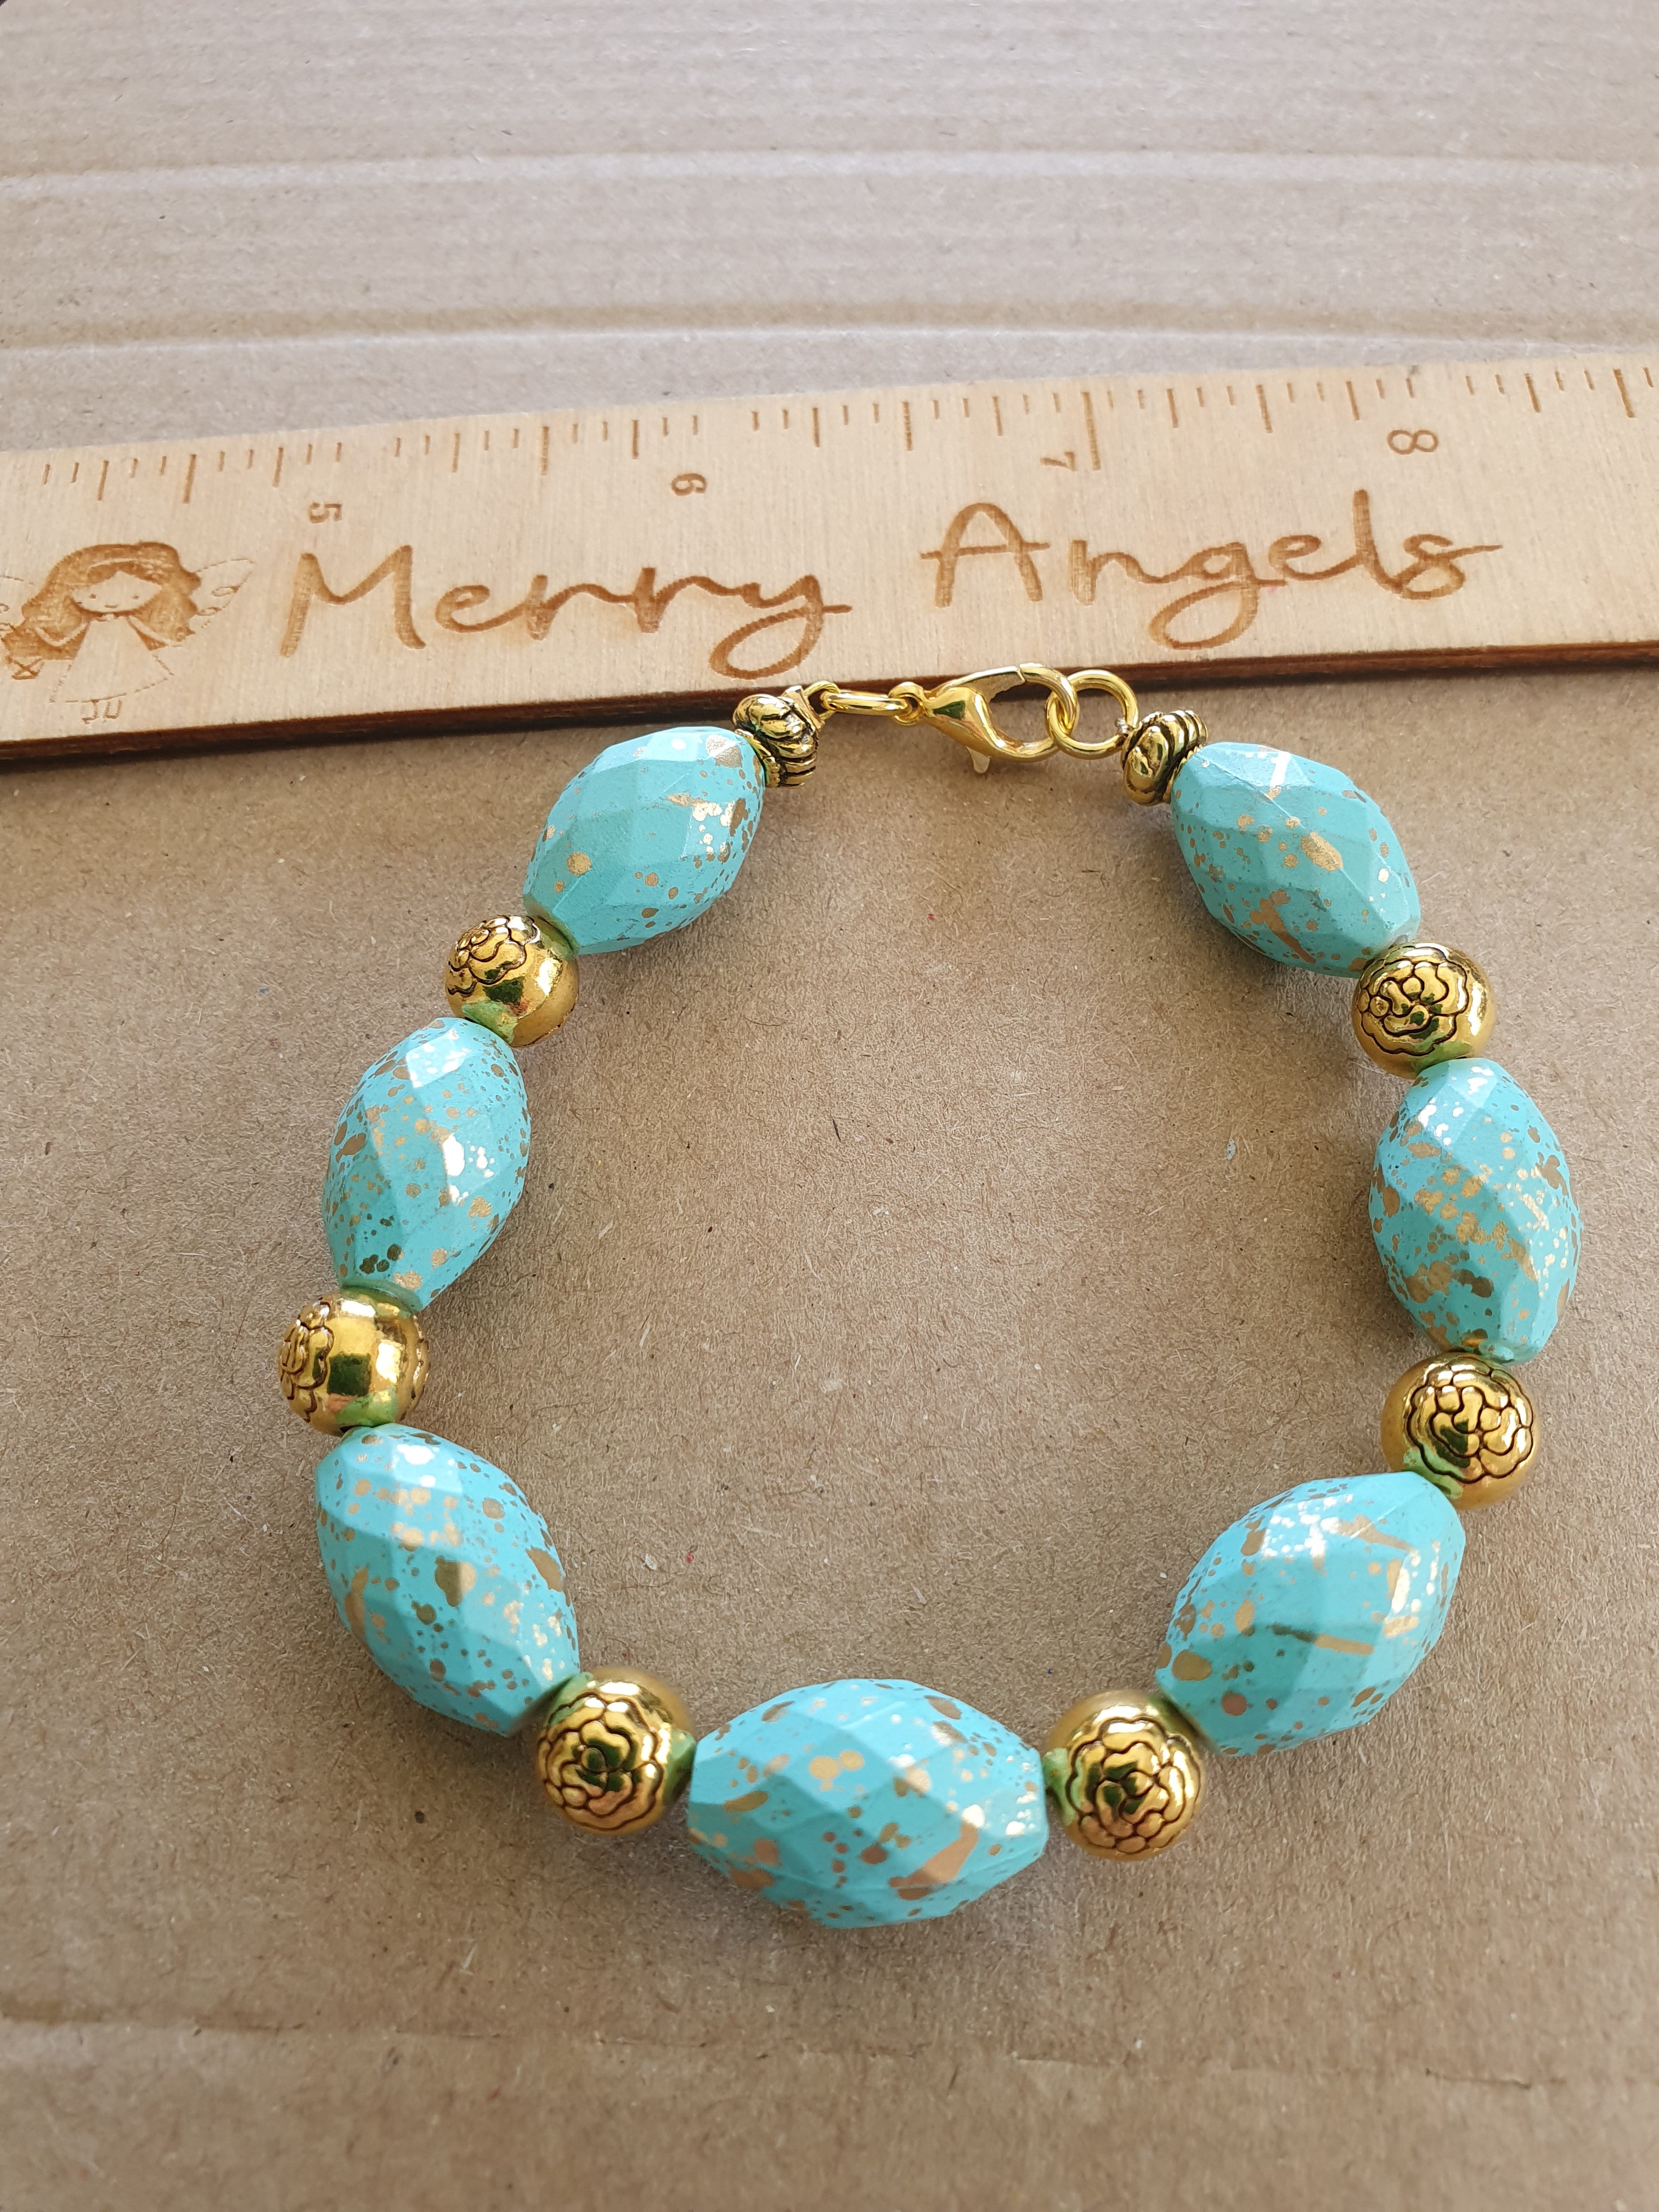 Turquoise and gold flower bracelet